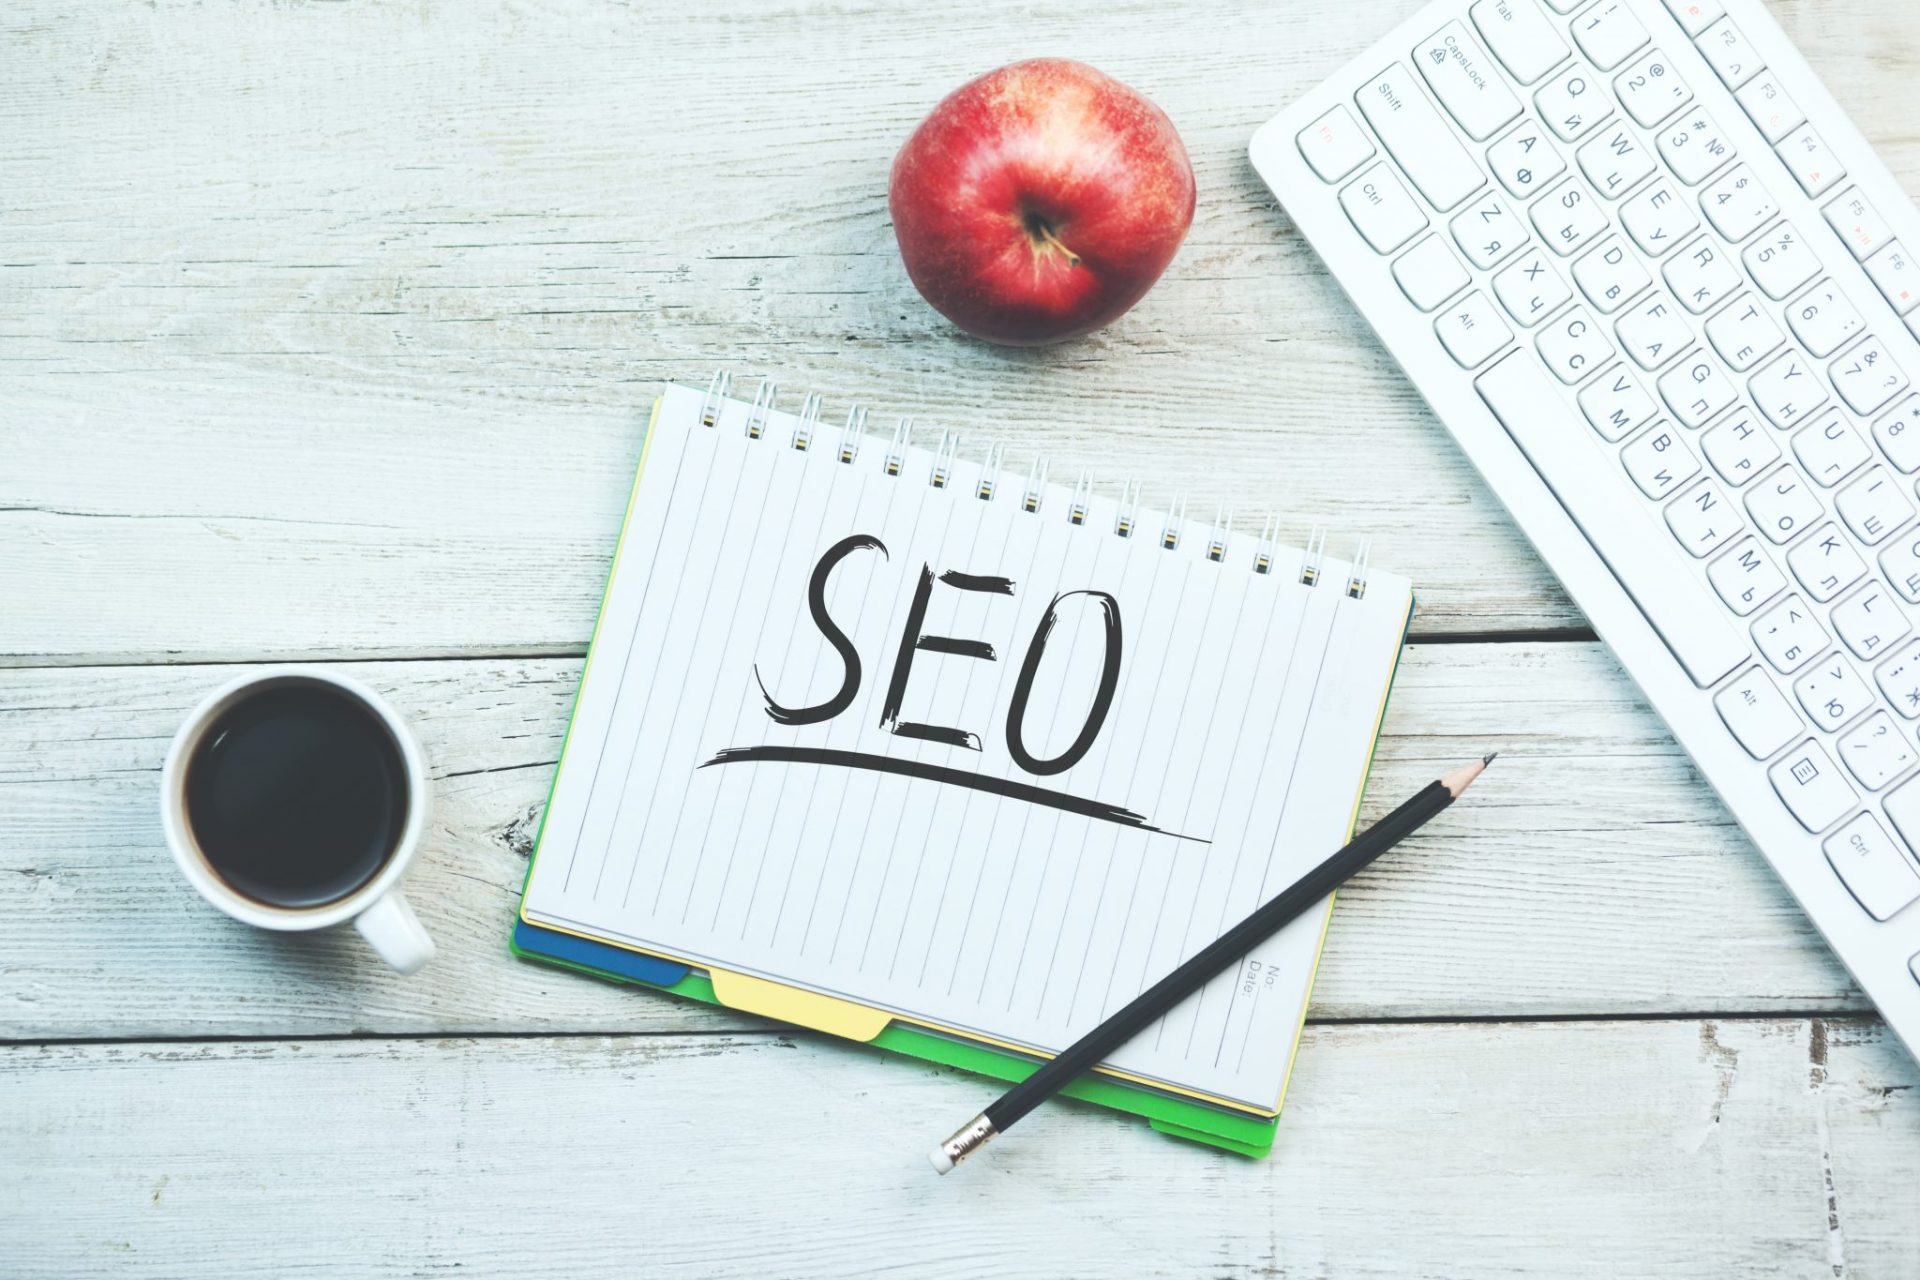 The word SEO is written on a notebook next to an apple and a keyboard, hinting at the importance of SEO strategies for online visibility.